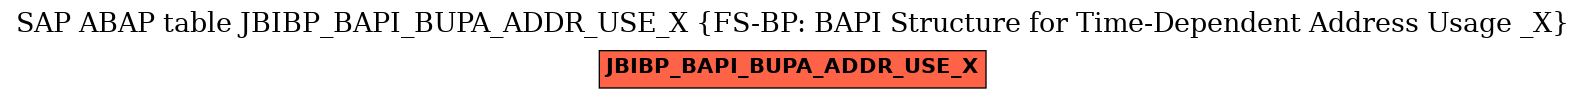 E-R Diagram for table JBIBP_BAPI_BUPA_ADDR_USE_X (FS-BP: BAPI Structure for Time-Dependent Address Usage _X)